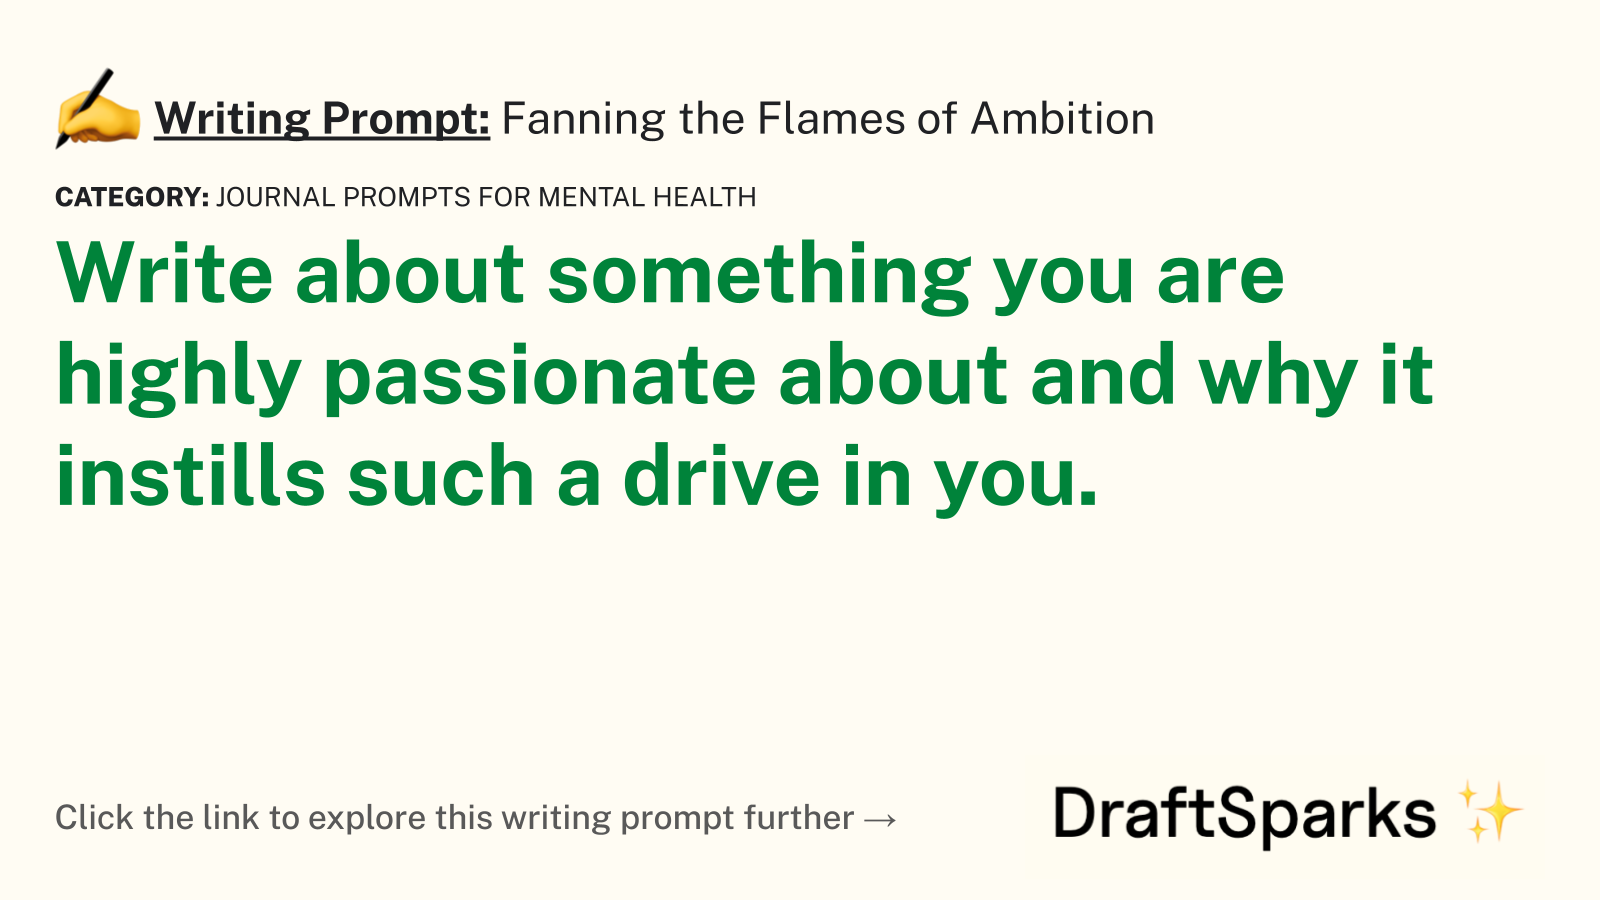 Fanning the Flames of Ambition